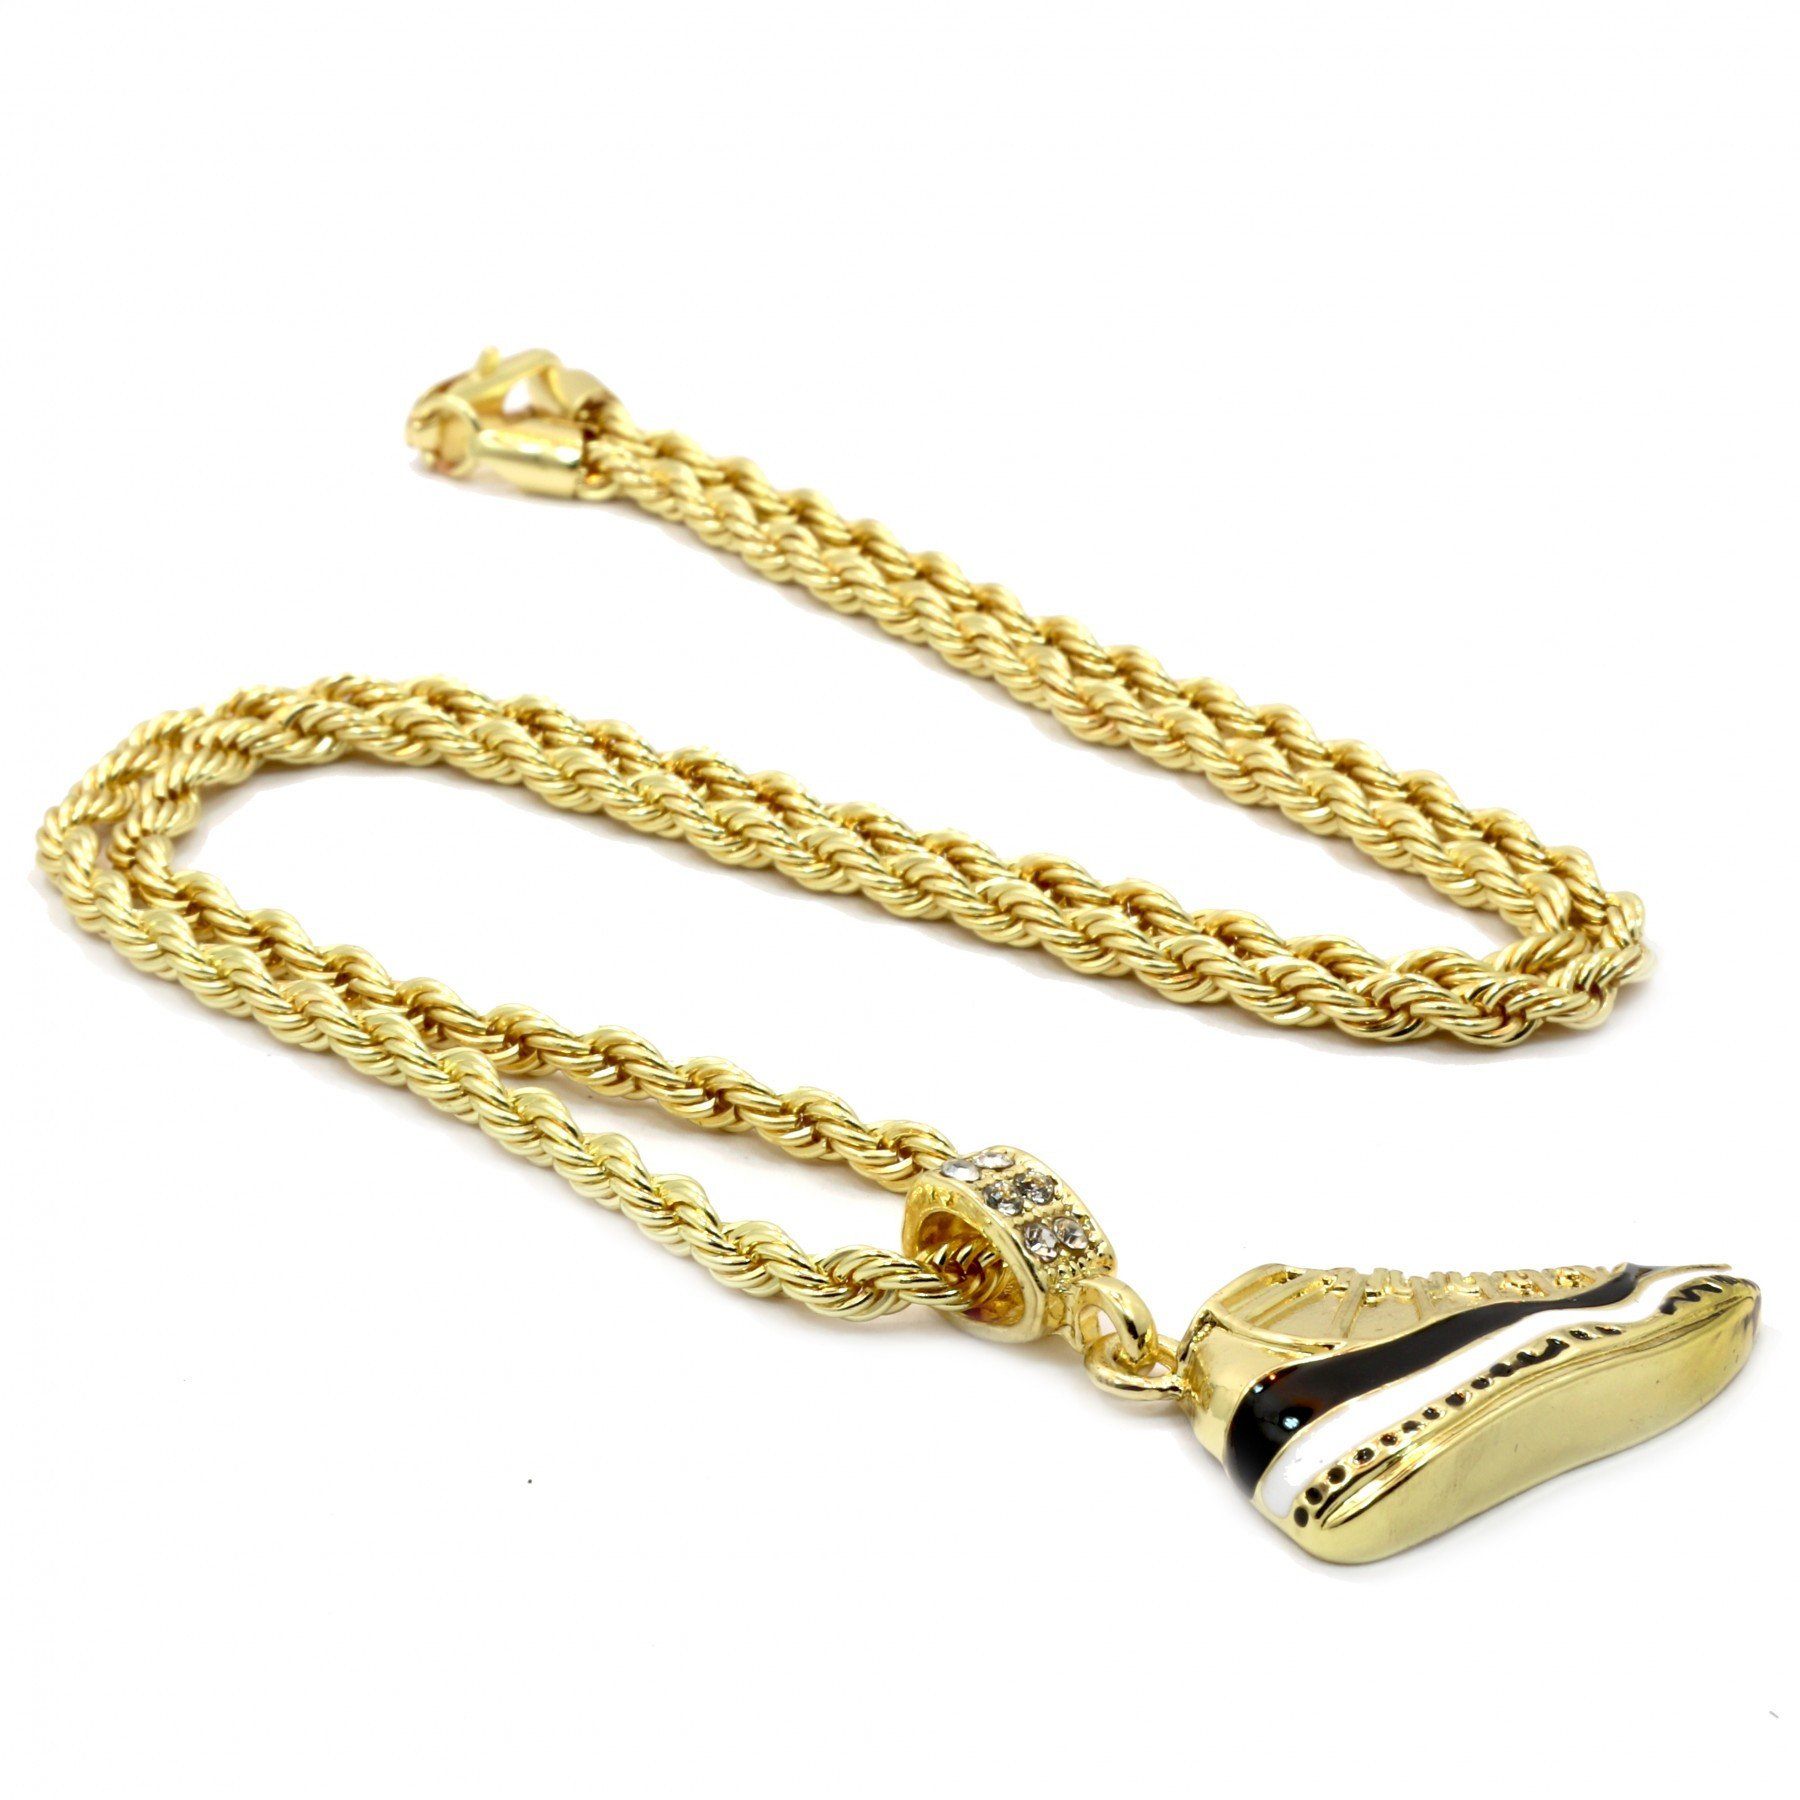 14K GOLD PLATED RETRO 11 "CONCORD" PENDANT WITH GOLD ROPE CHAIN